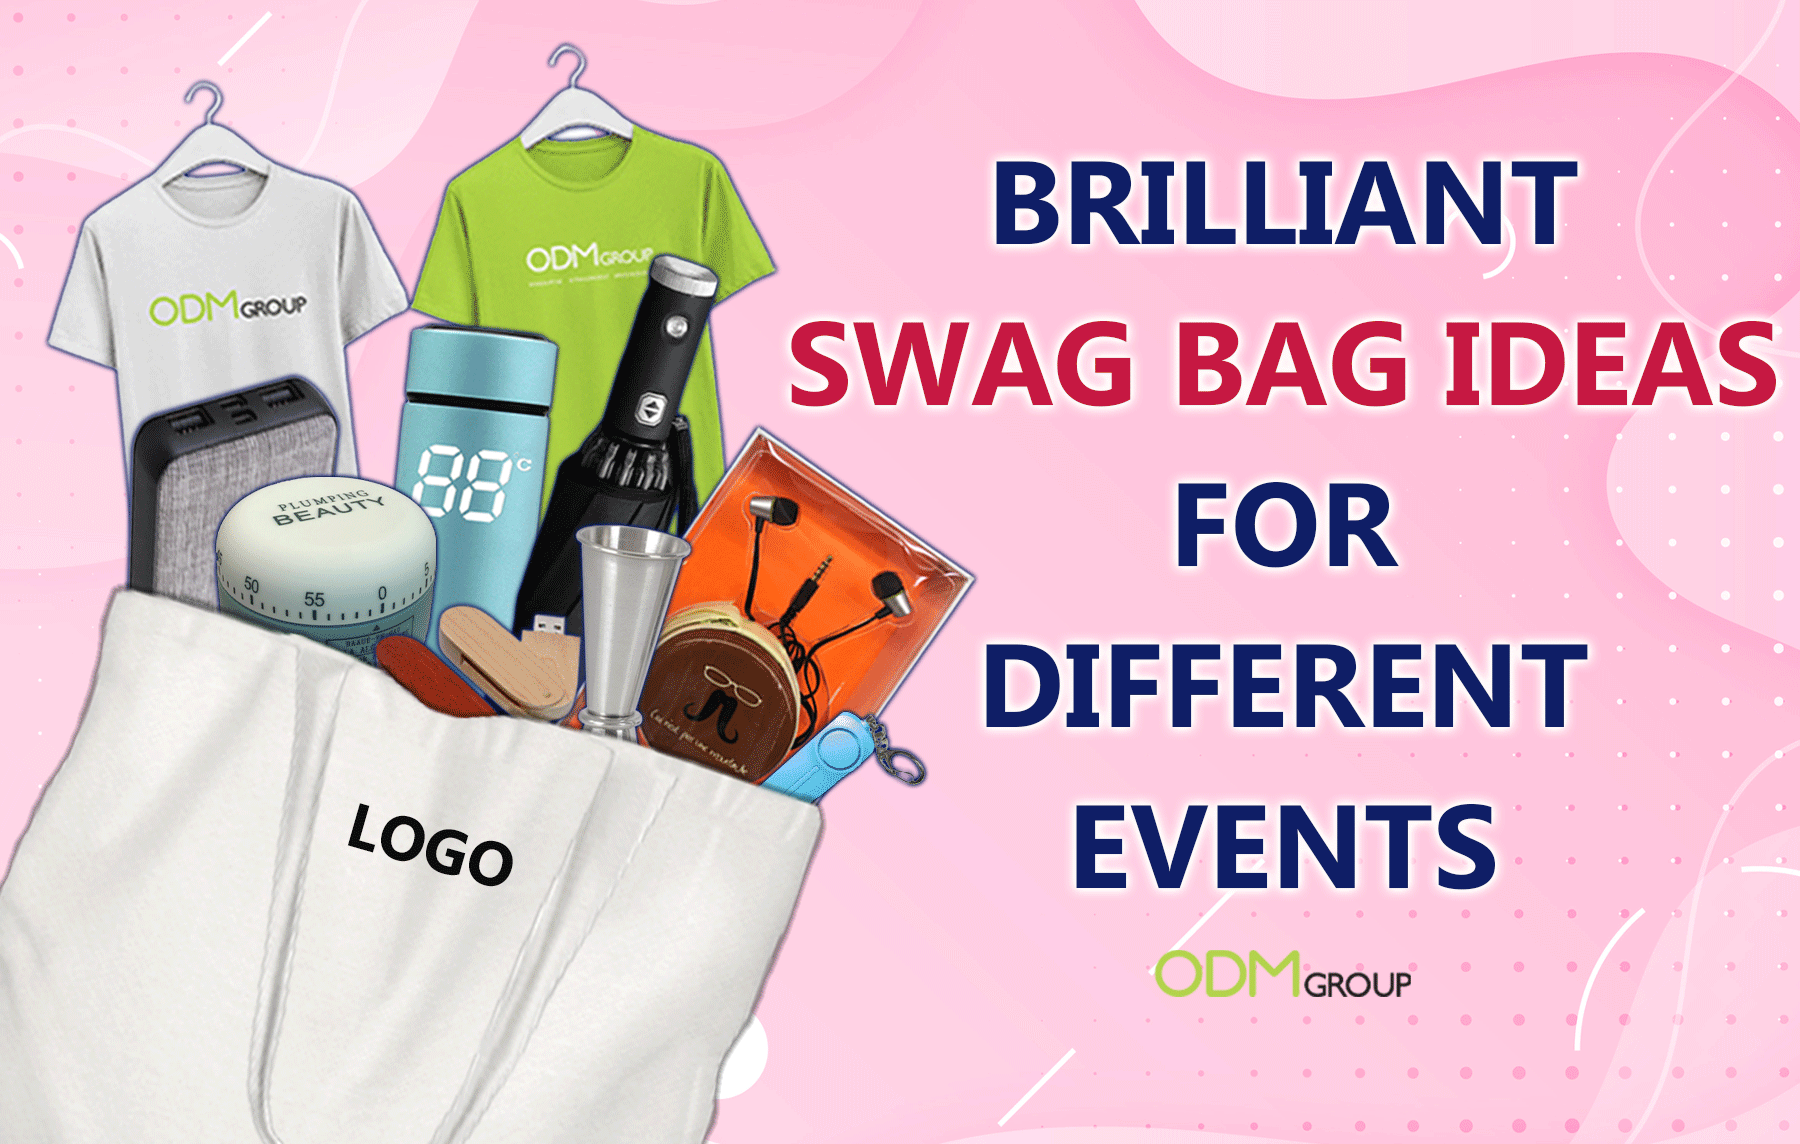 Swag bag ideas for different events